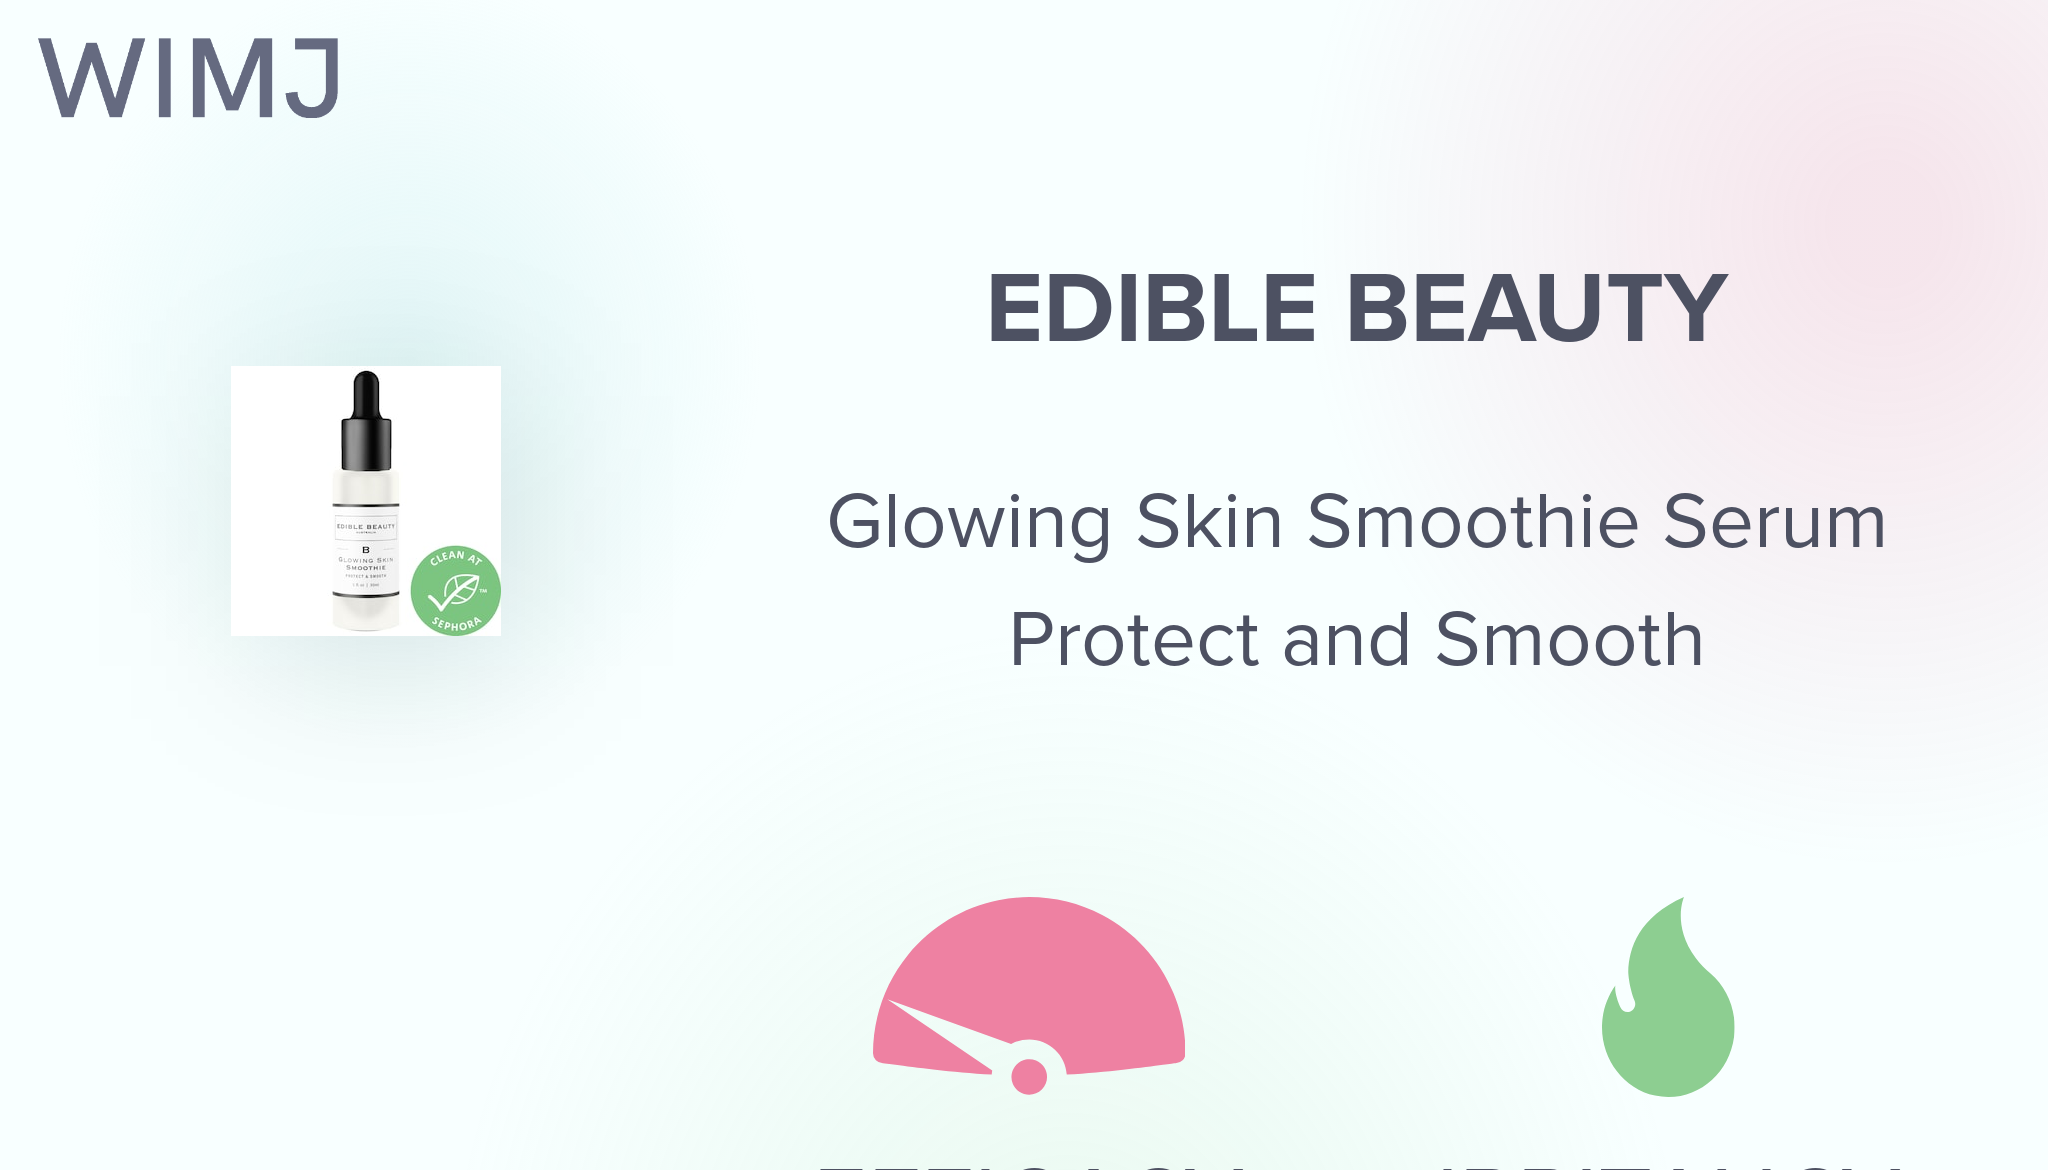 Review: Edible Beauty - Glowing Skin Smoothie Serum Protect and Smooth -  WIMJ